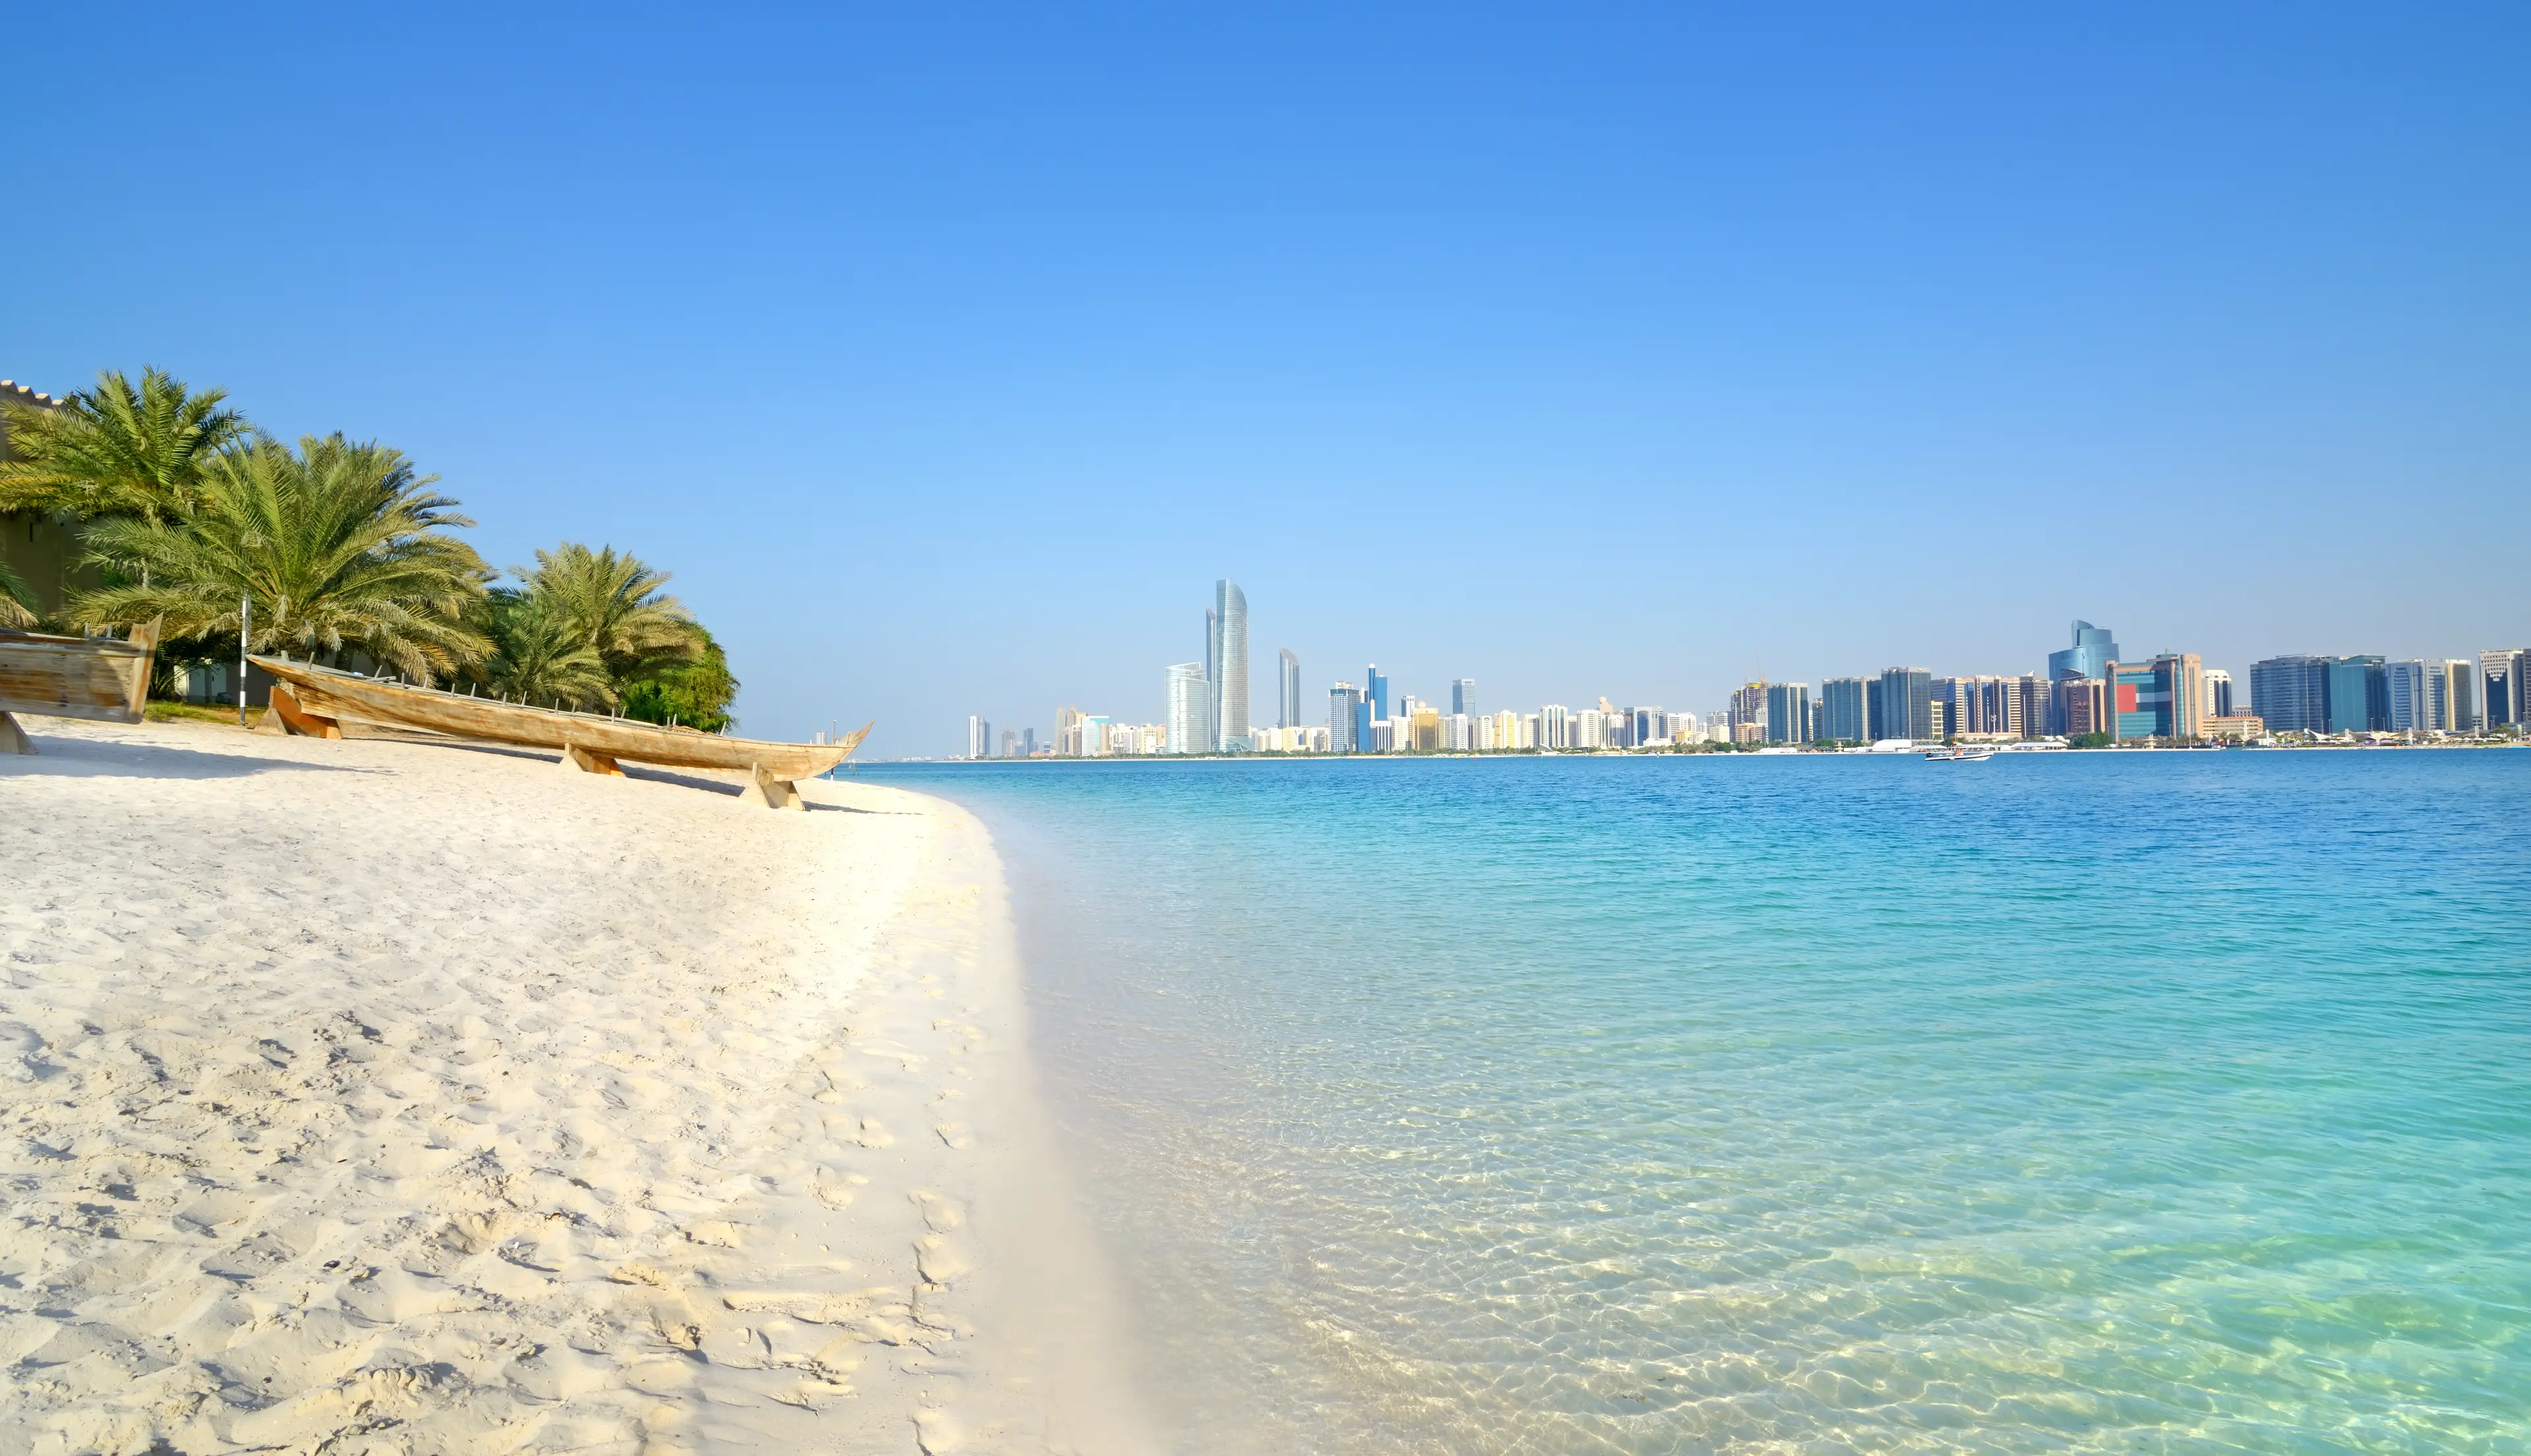 4-Day Local Food, Wine & Outdoor Adventure with Friends in Abu Dhabi